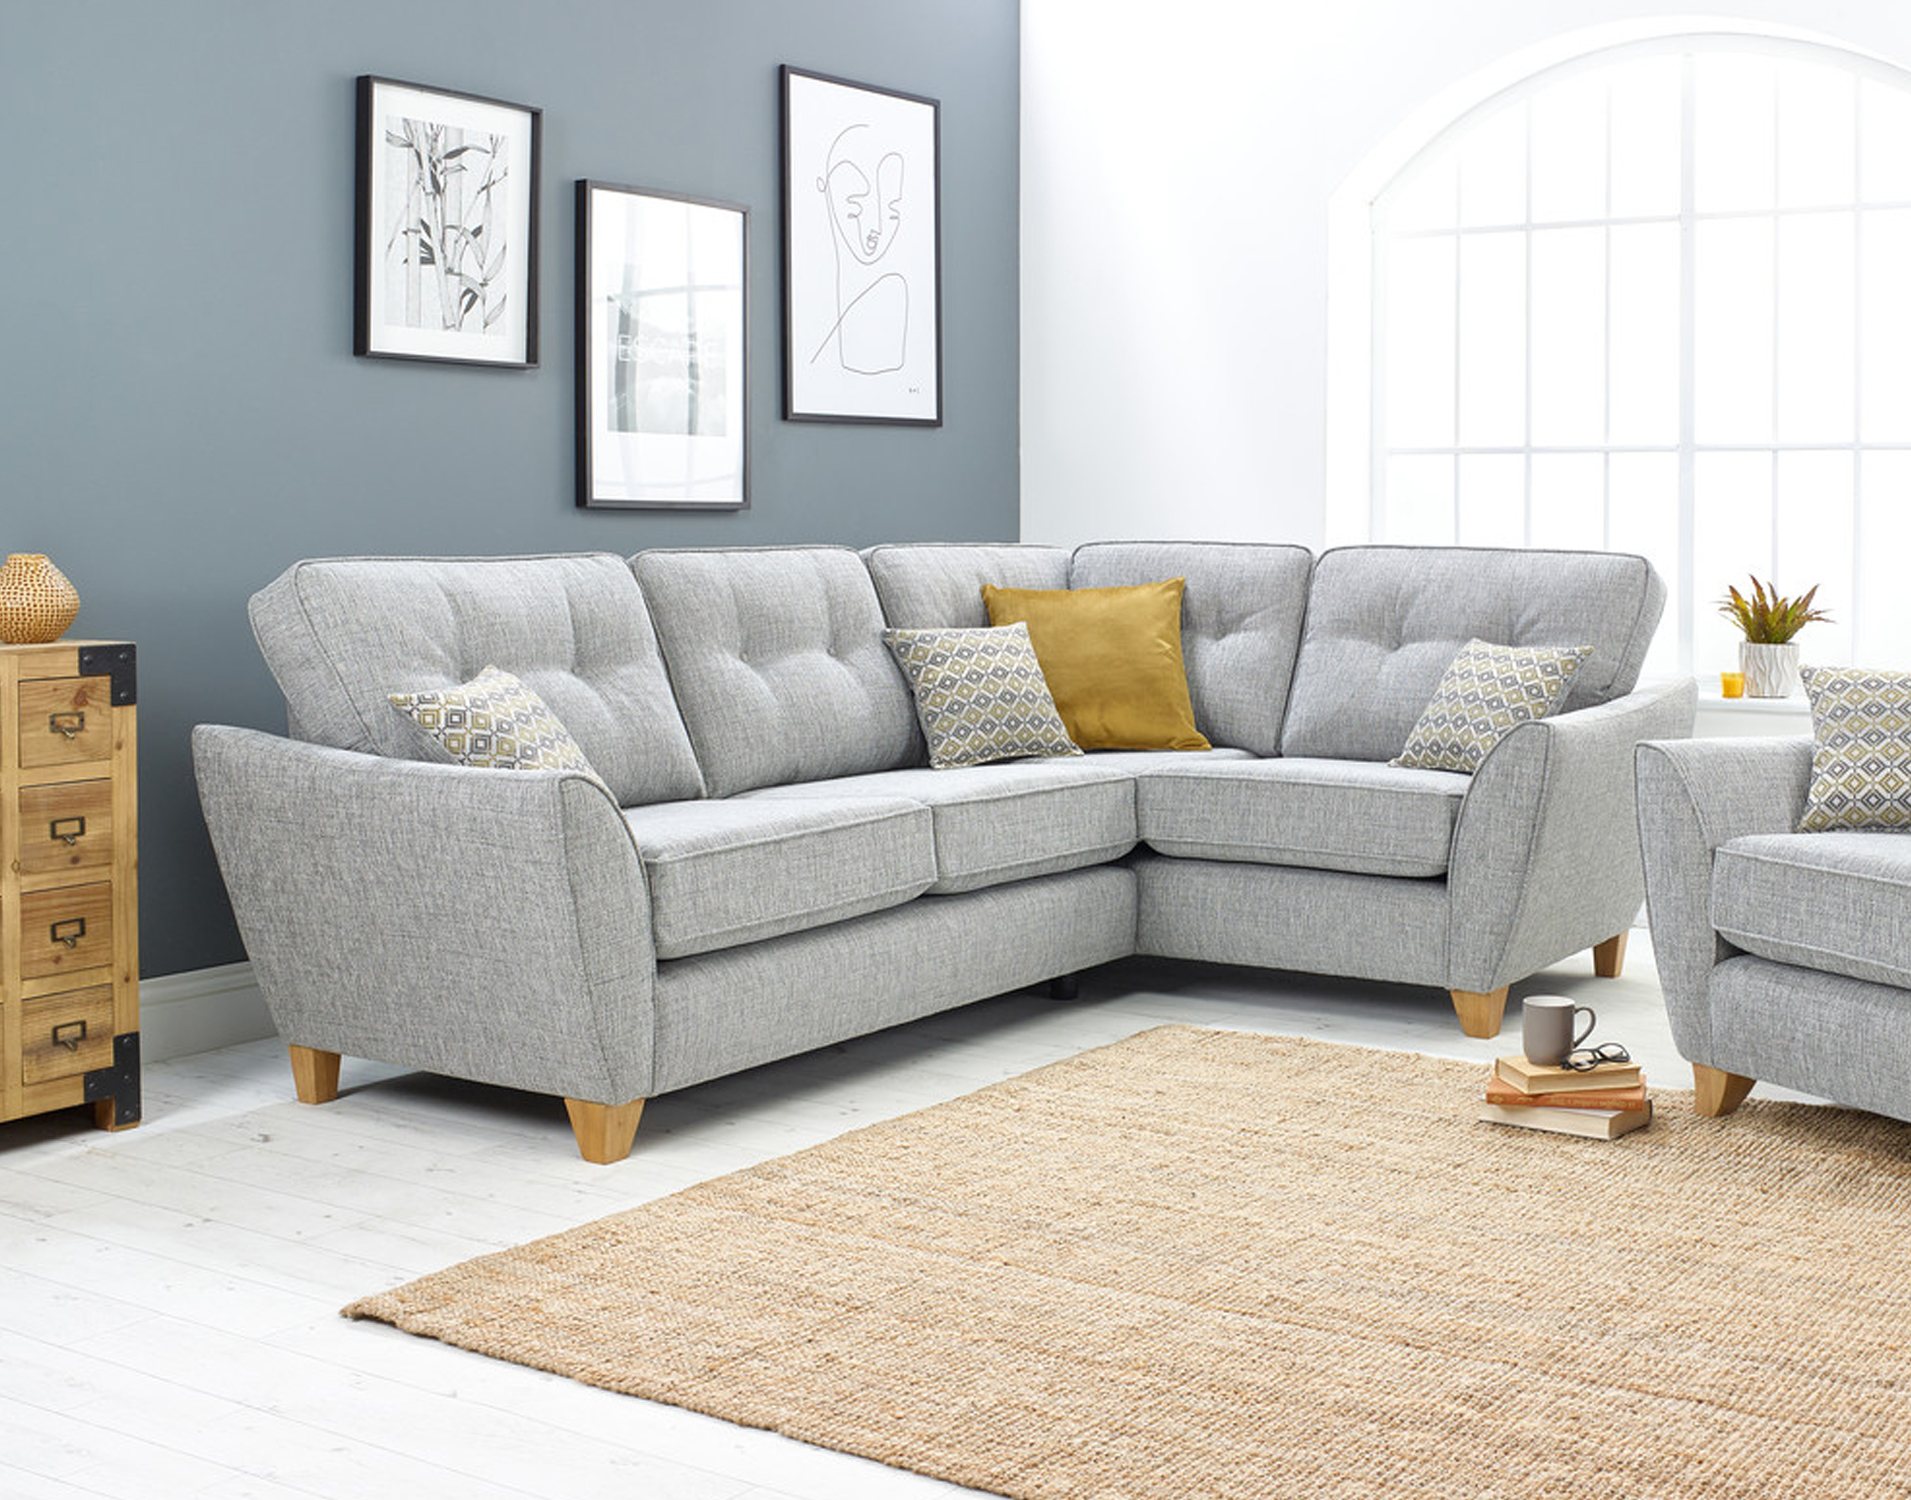 Corner Couch For Small Living Room